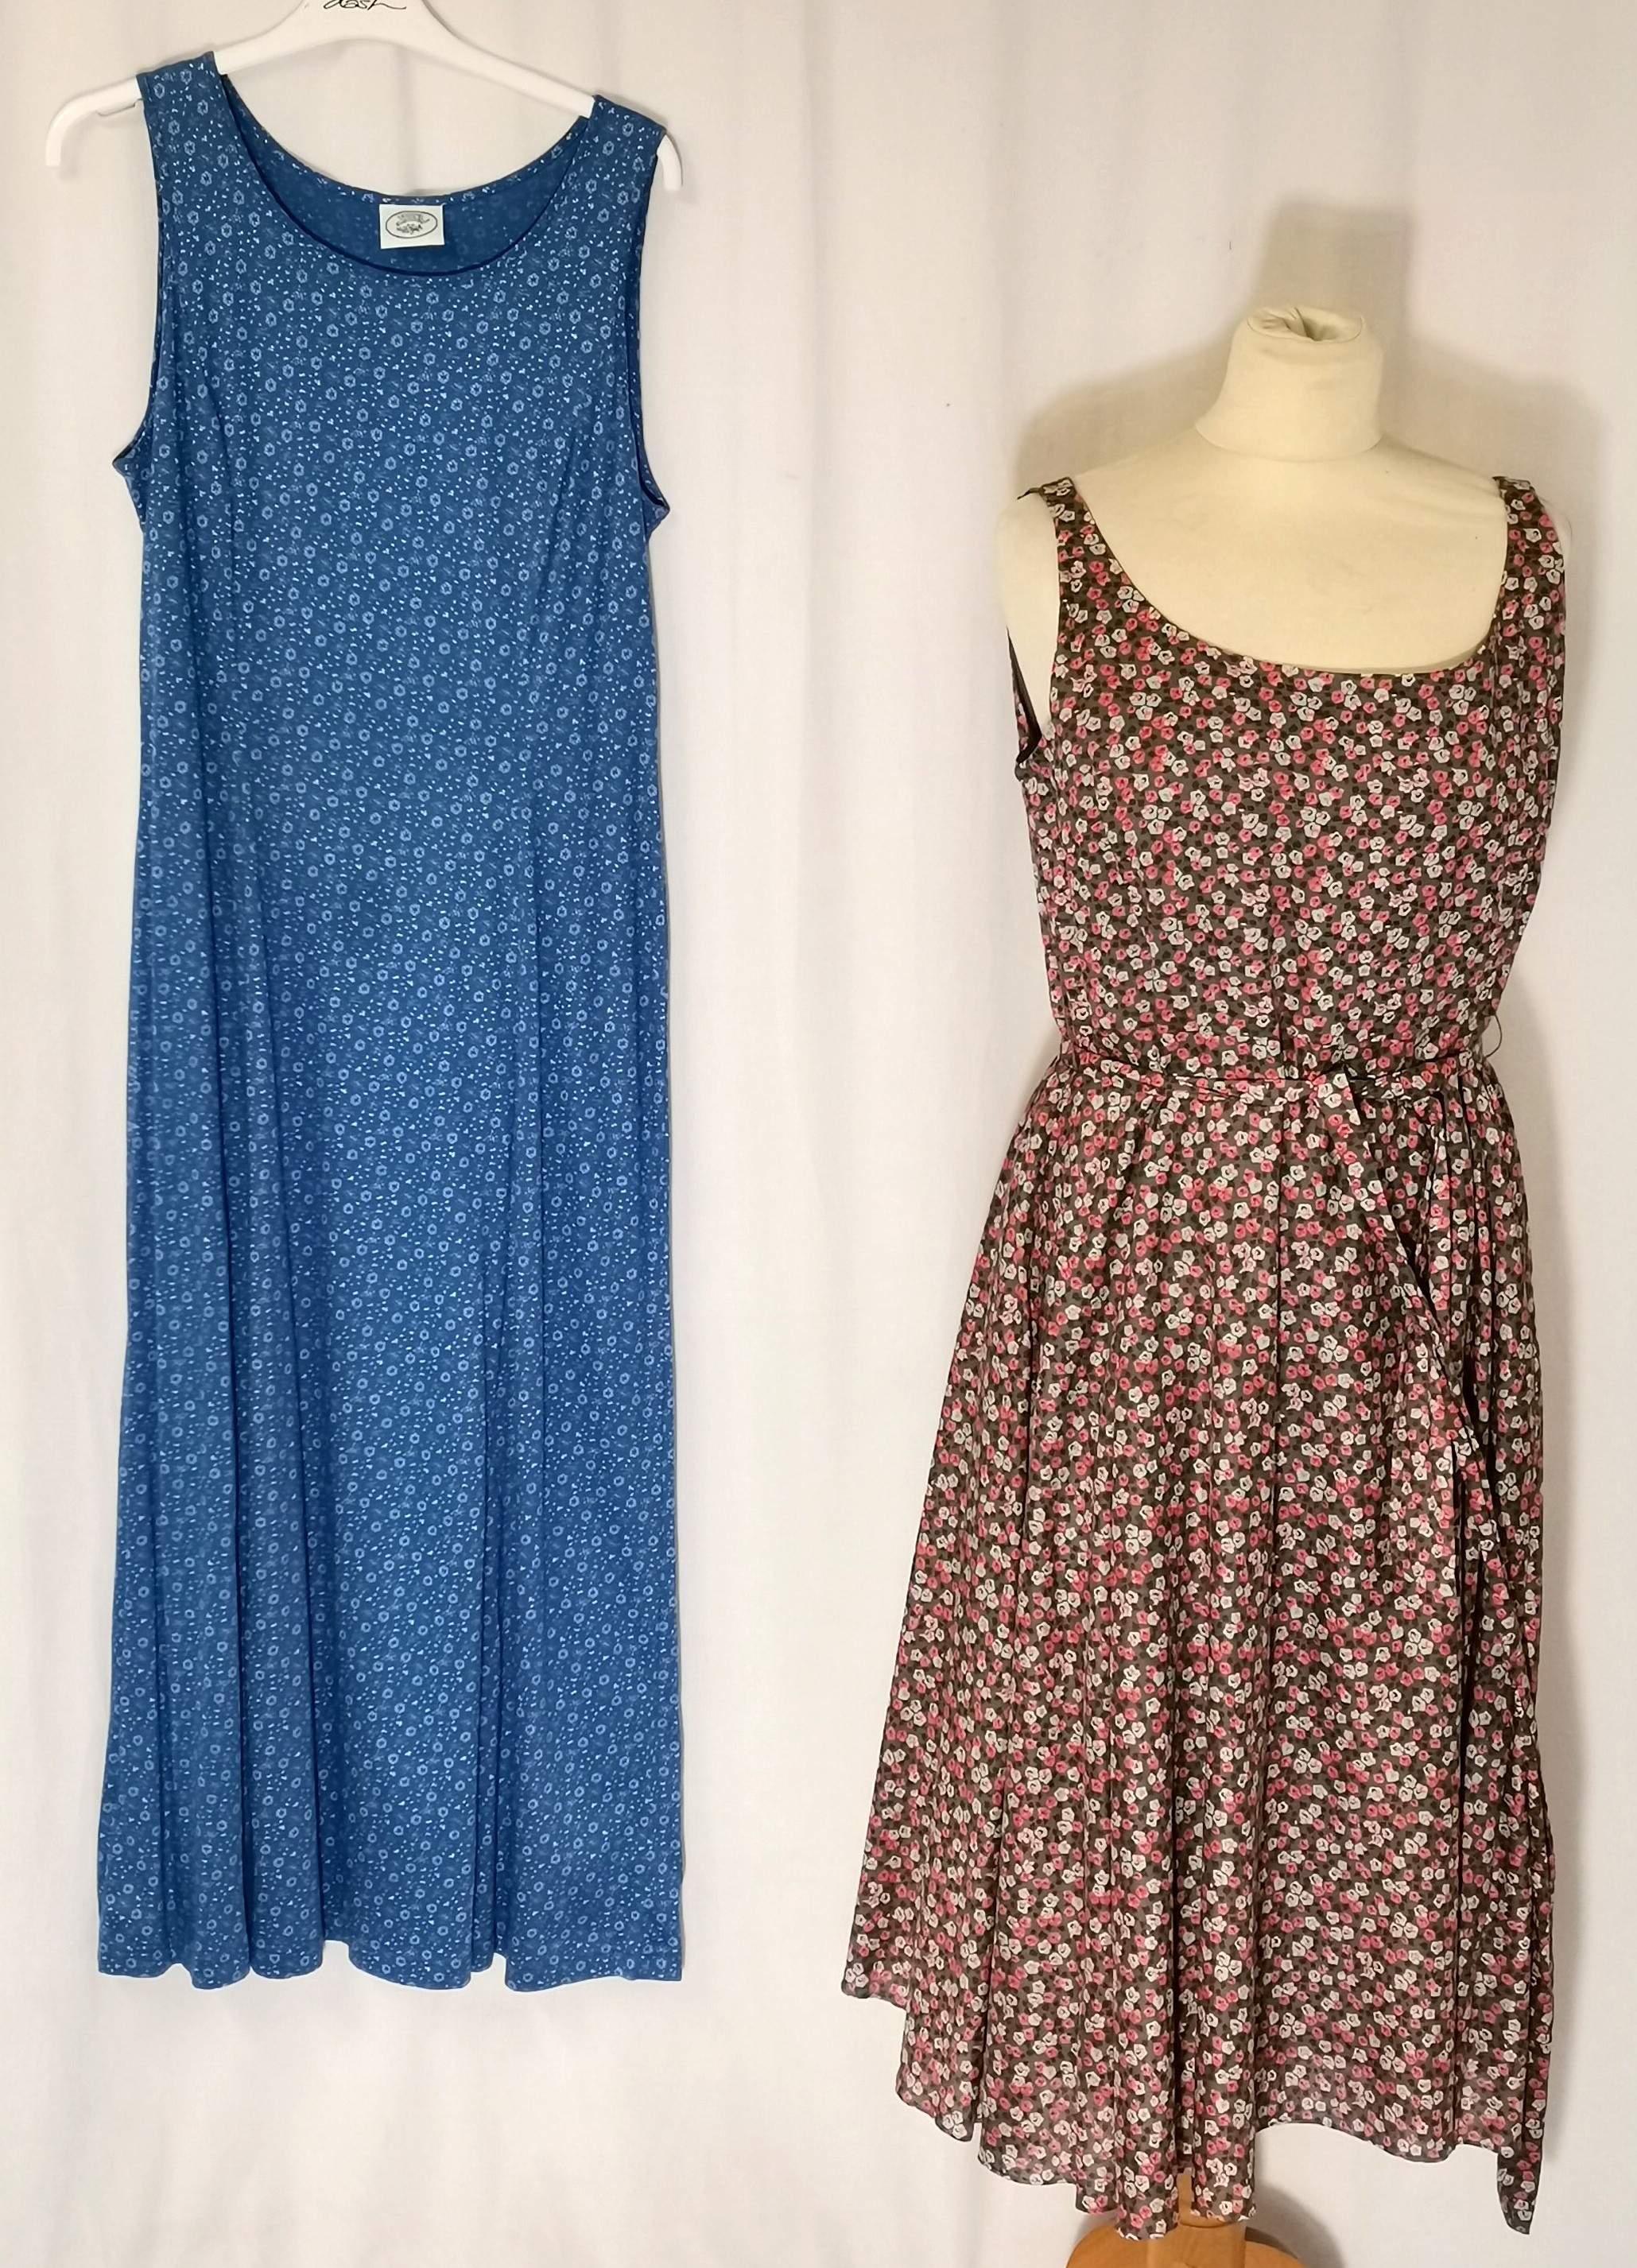 Vintage Laura Ashley sleeveless summer dresses, blue cotton is 96cm bust, floral pattern is size